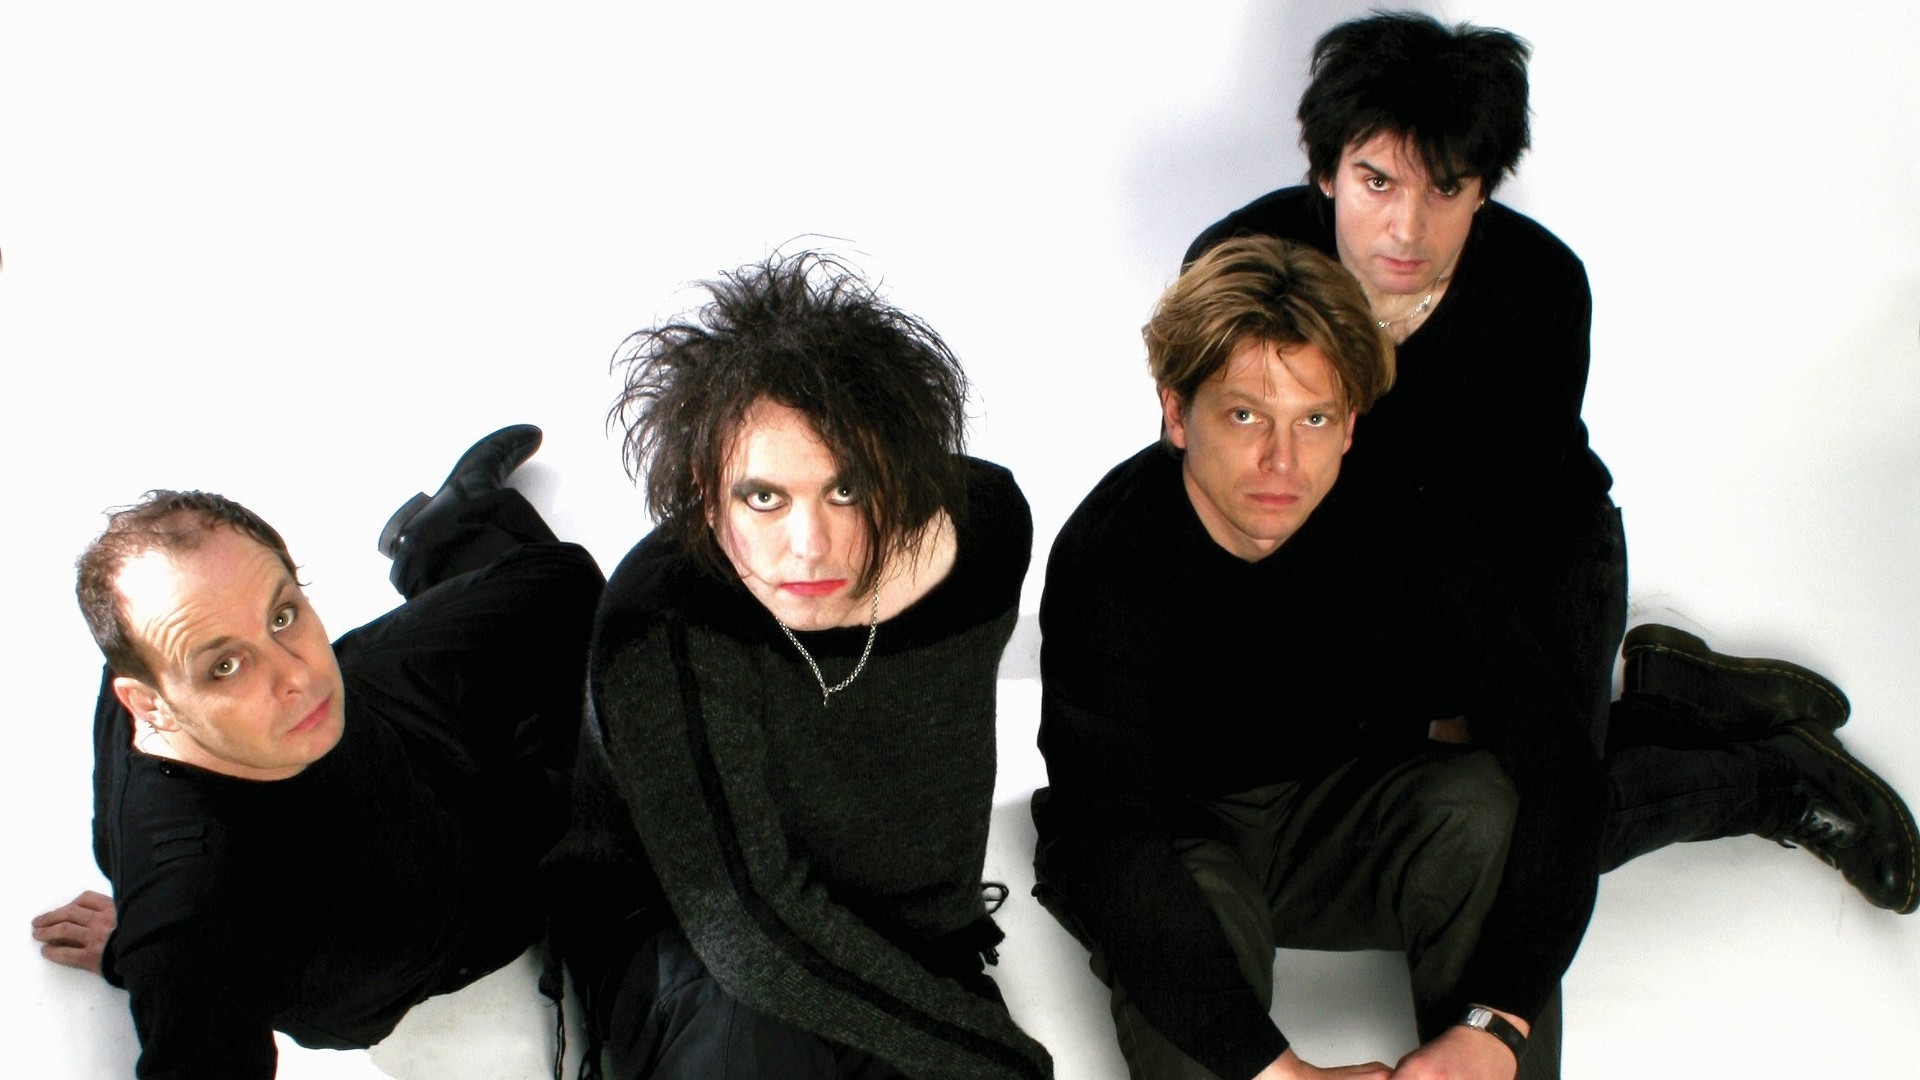 The Cure Wallpapers.